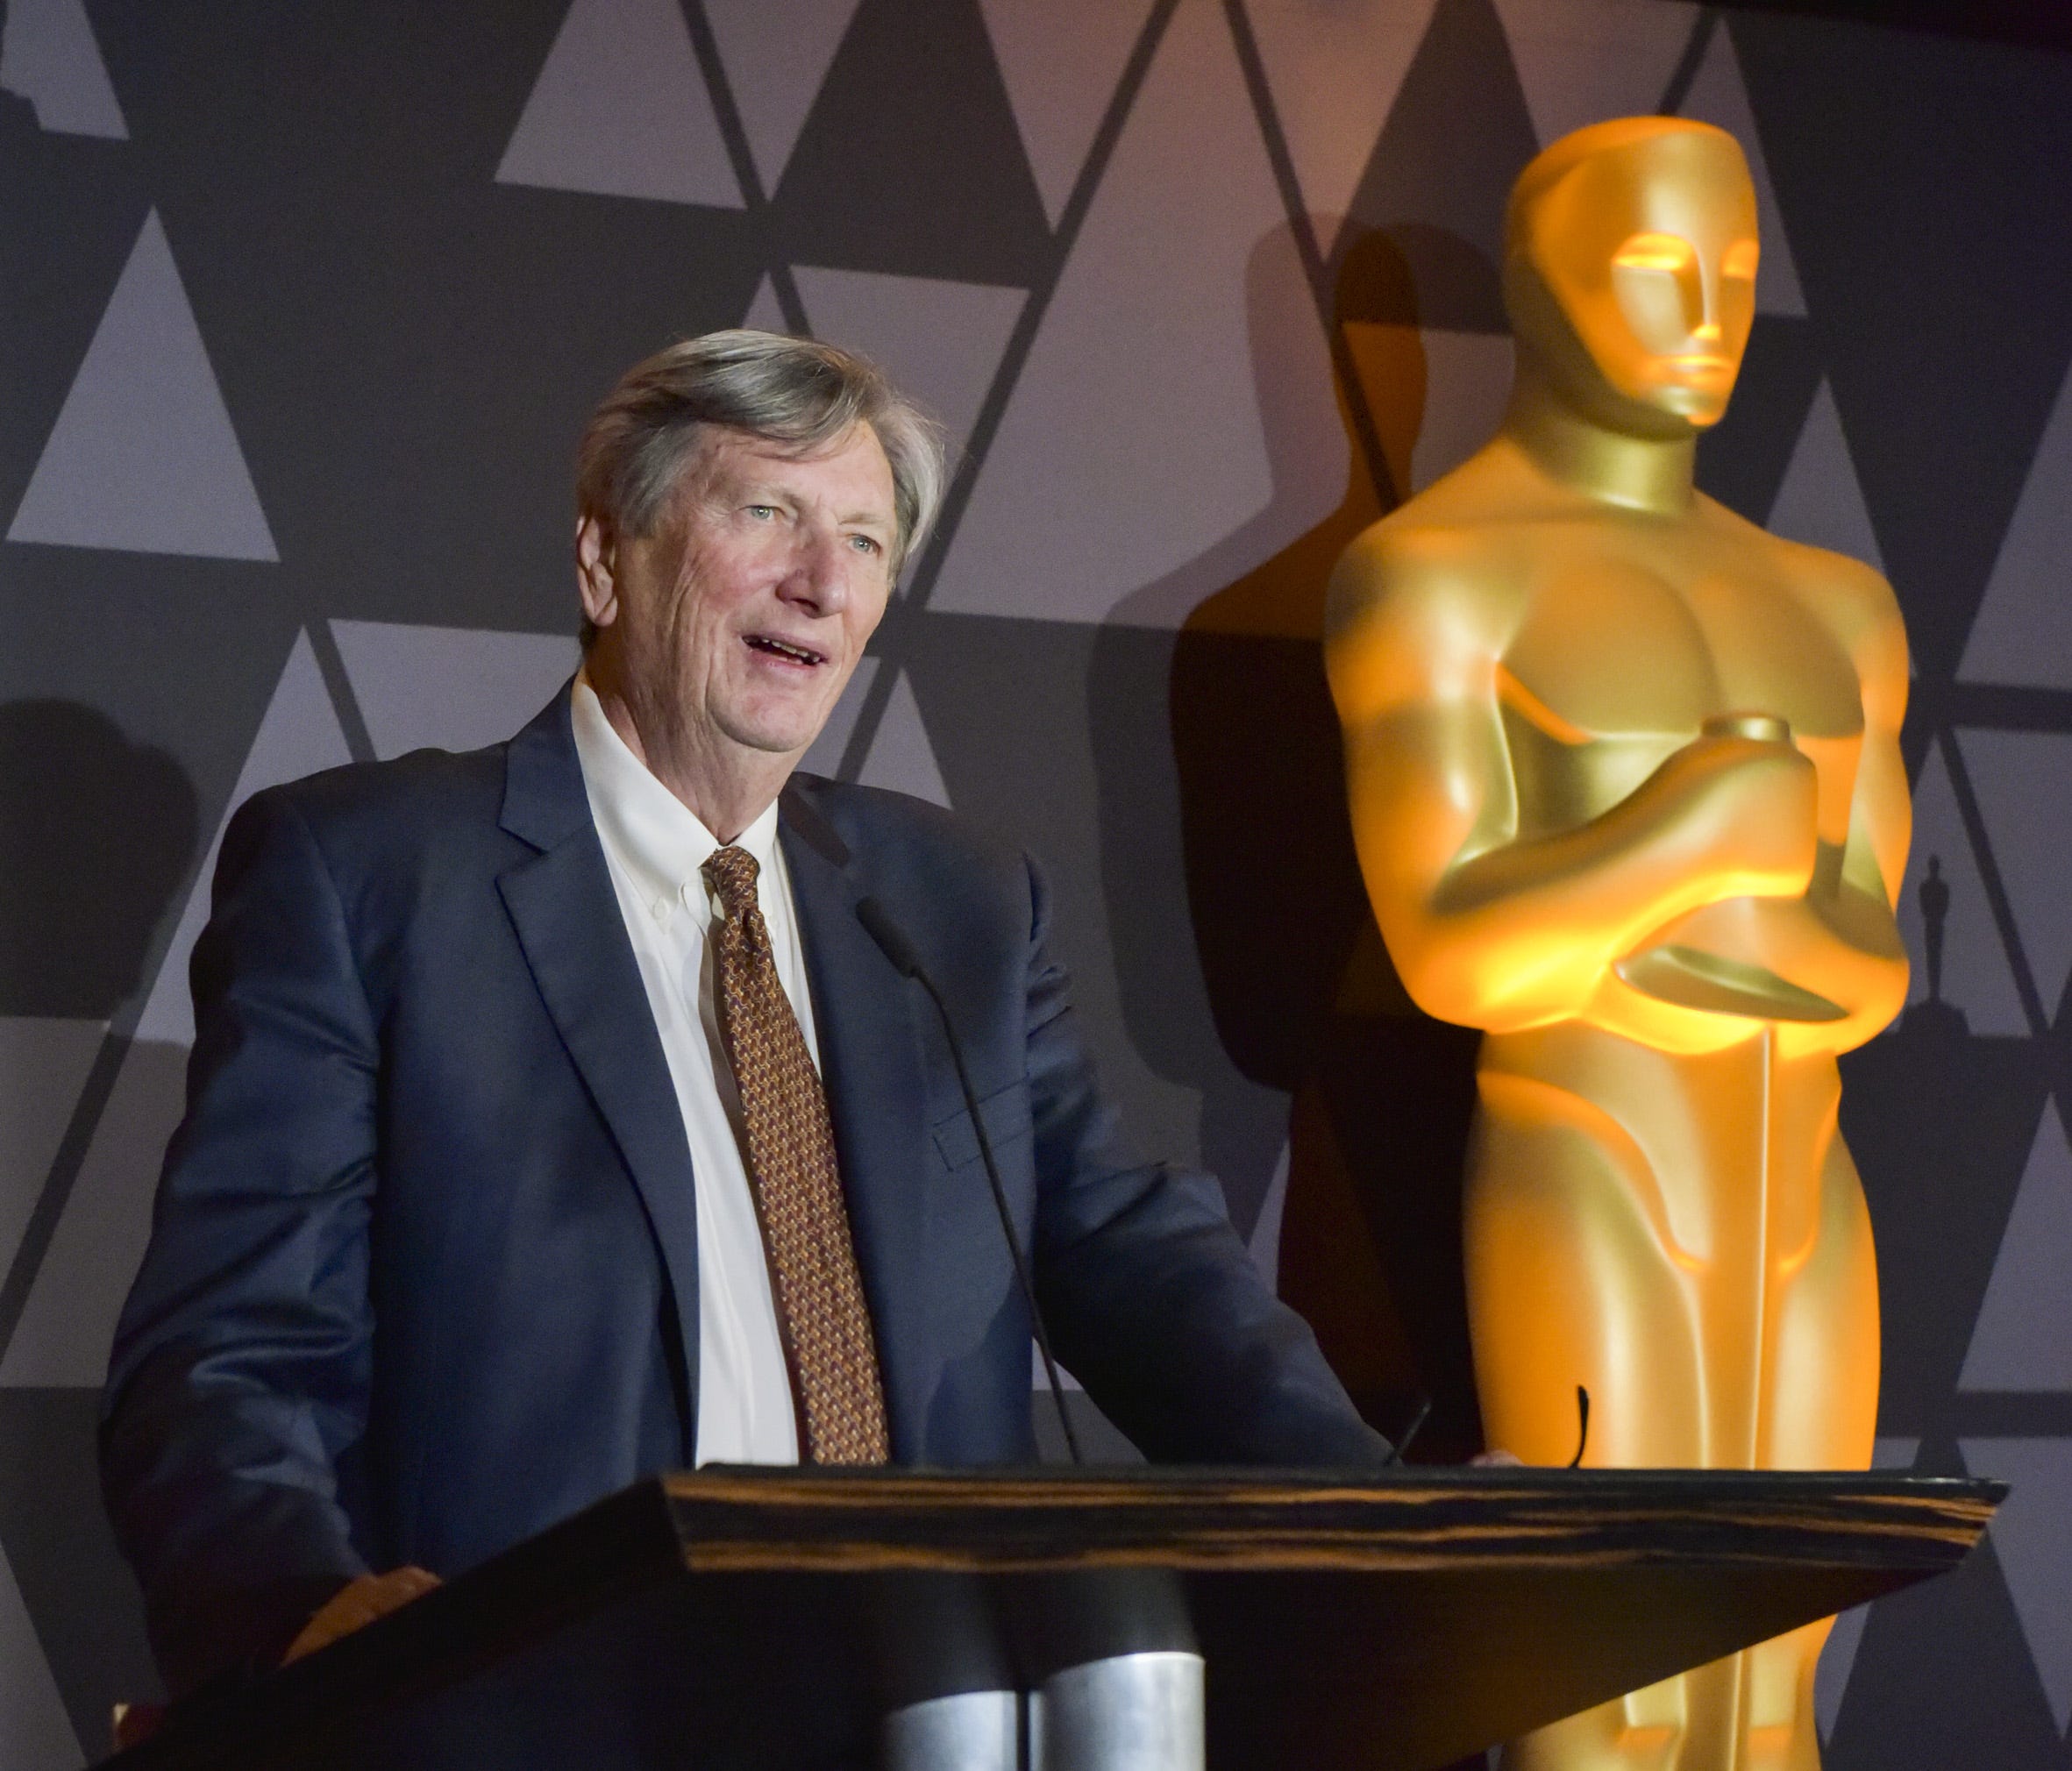 Academy president John Bailey speaks onstage at a reception on March 2.